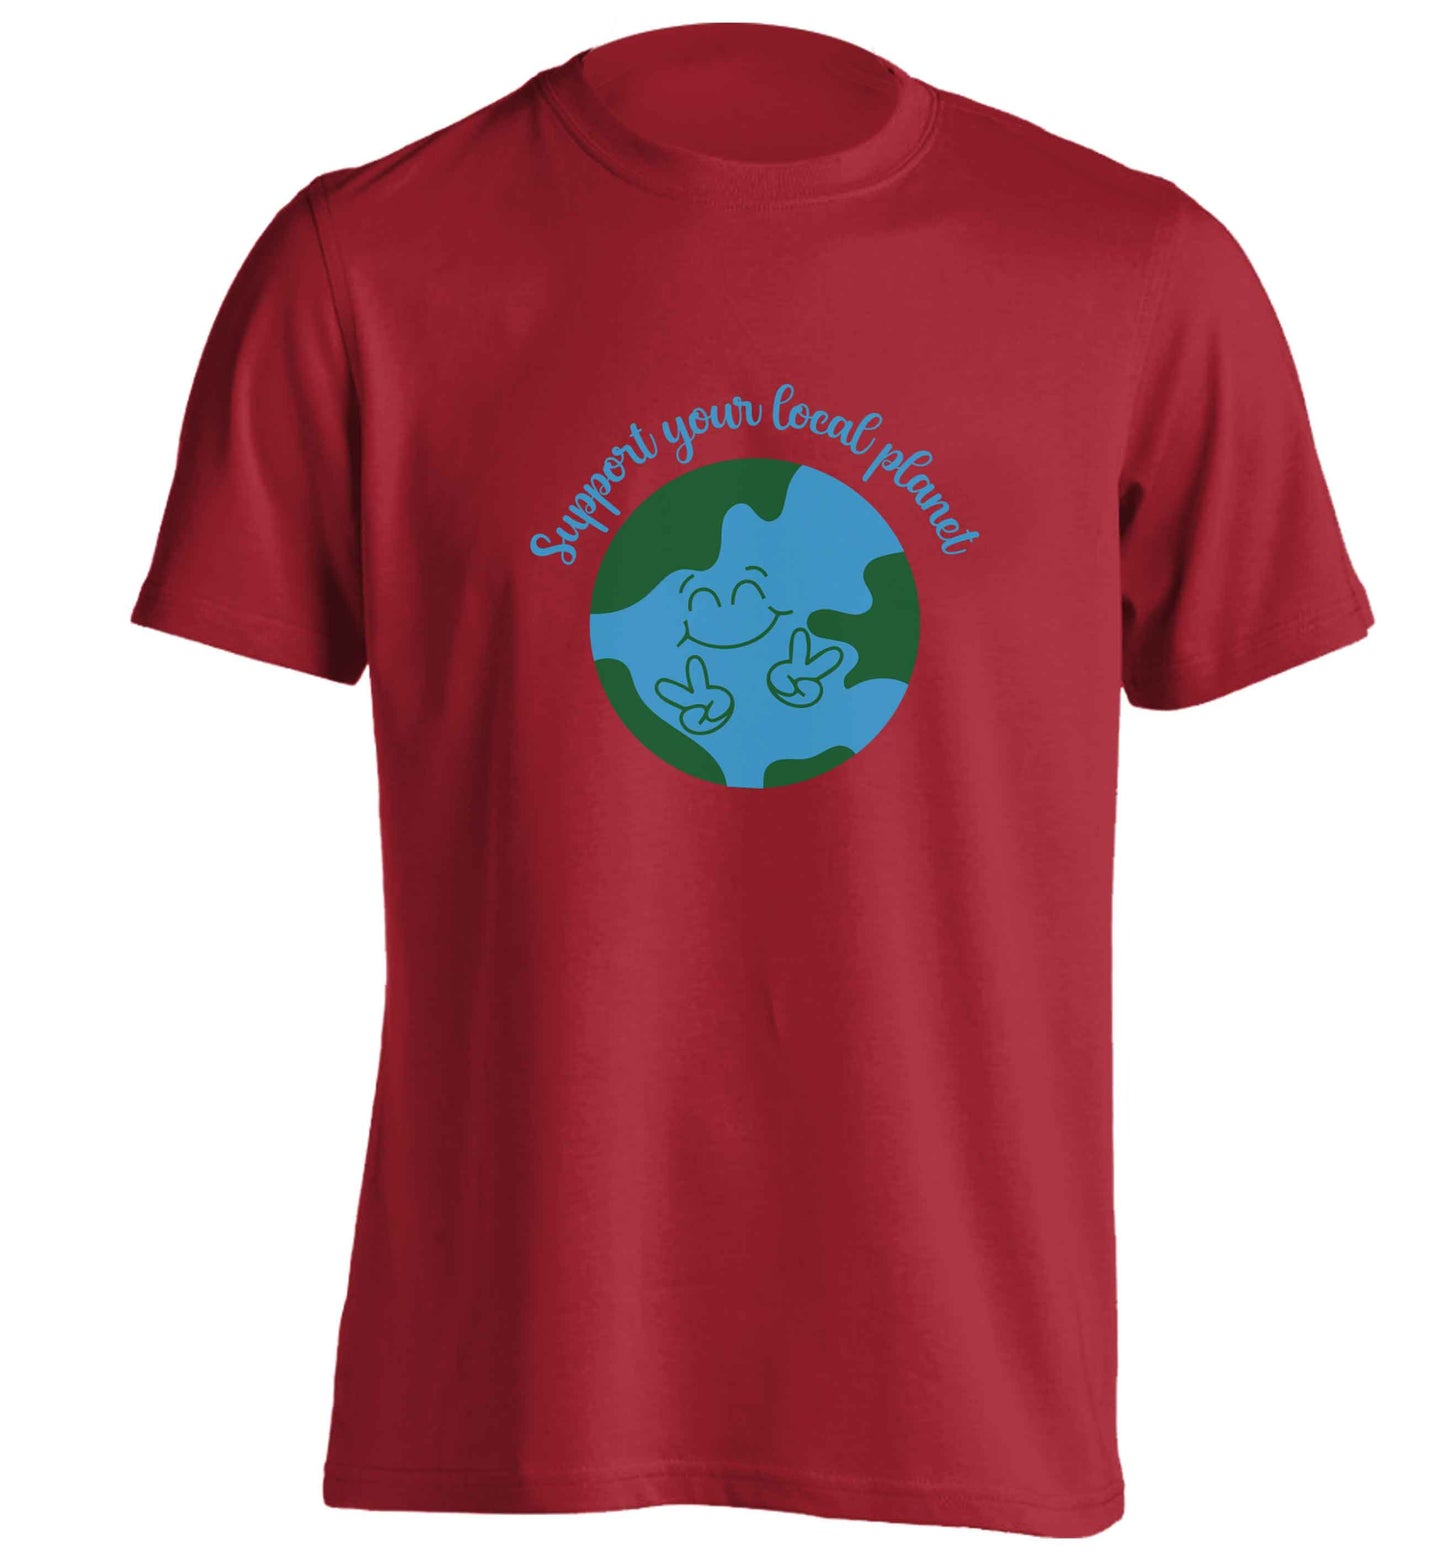 Support your local planet adults unisex red Tshirt 2XL